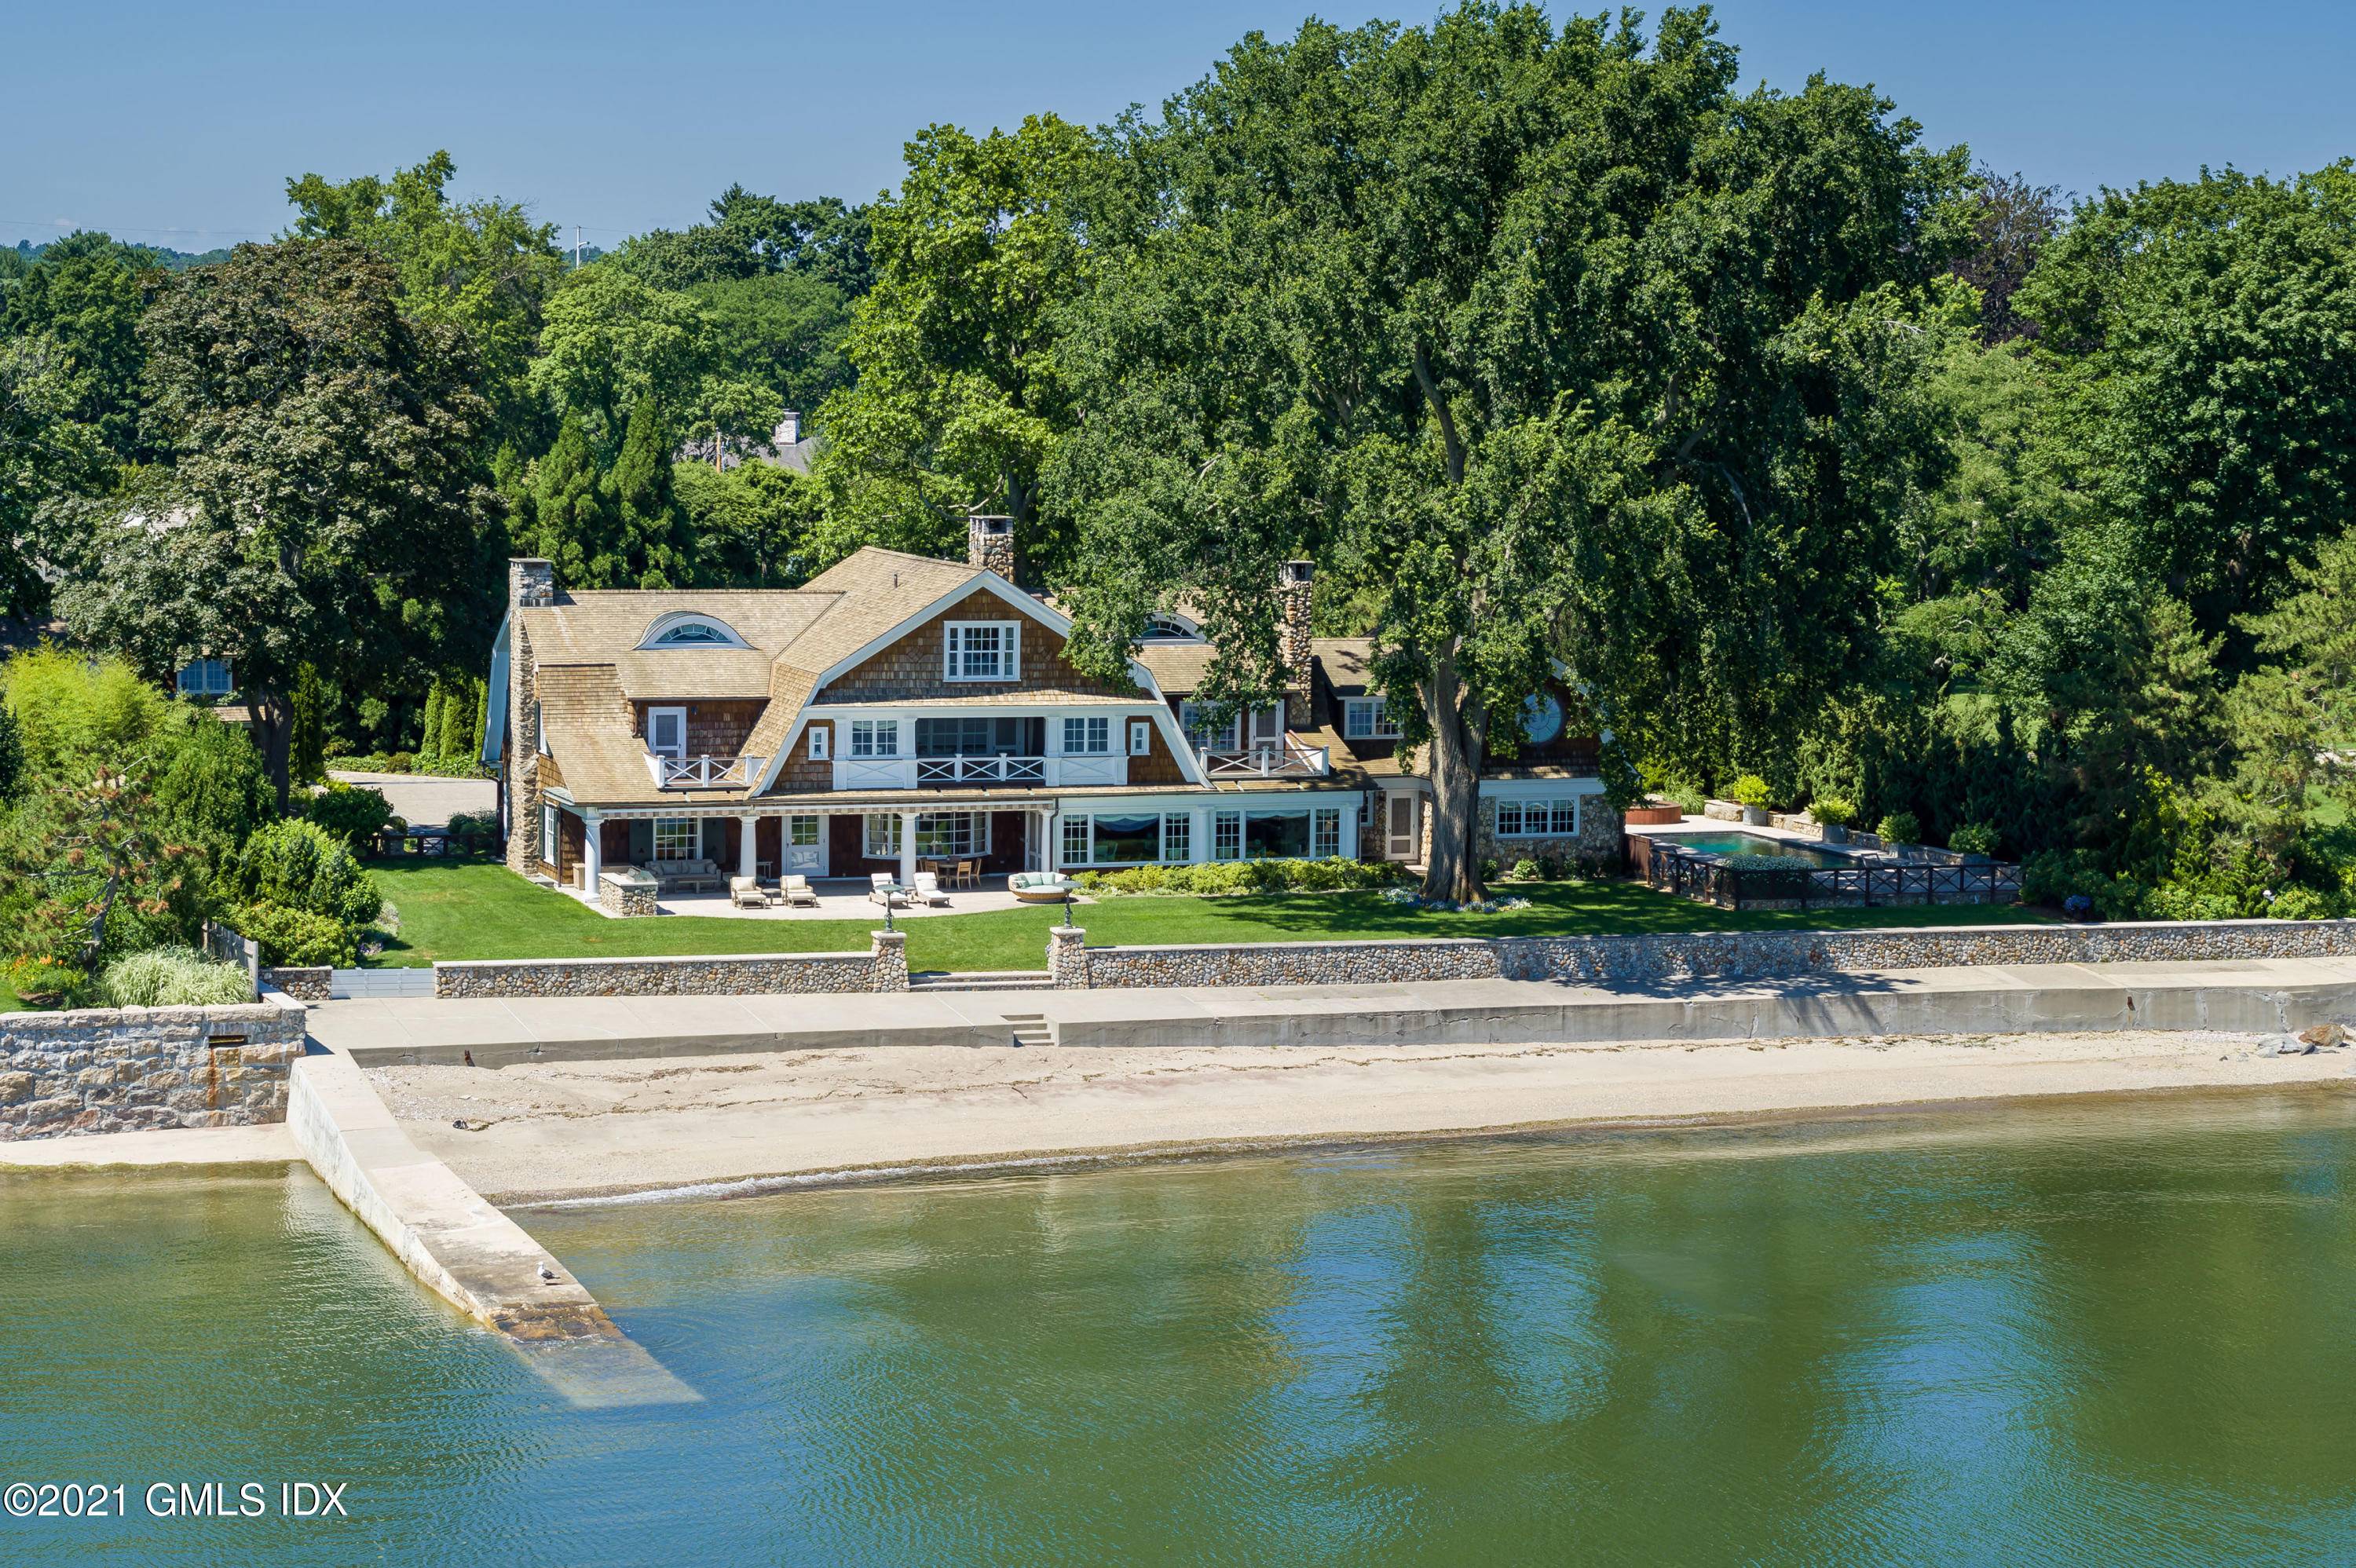 With a sensational location directly on Long Island Sound, this spectacular 1.